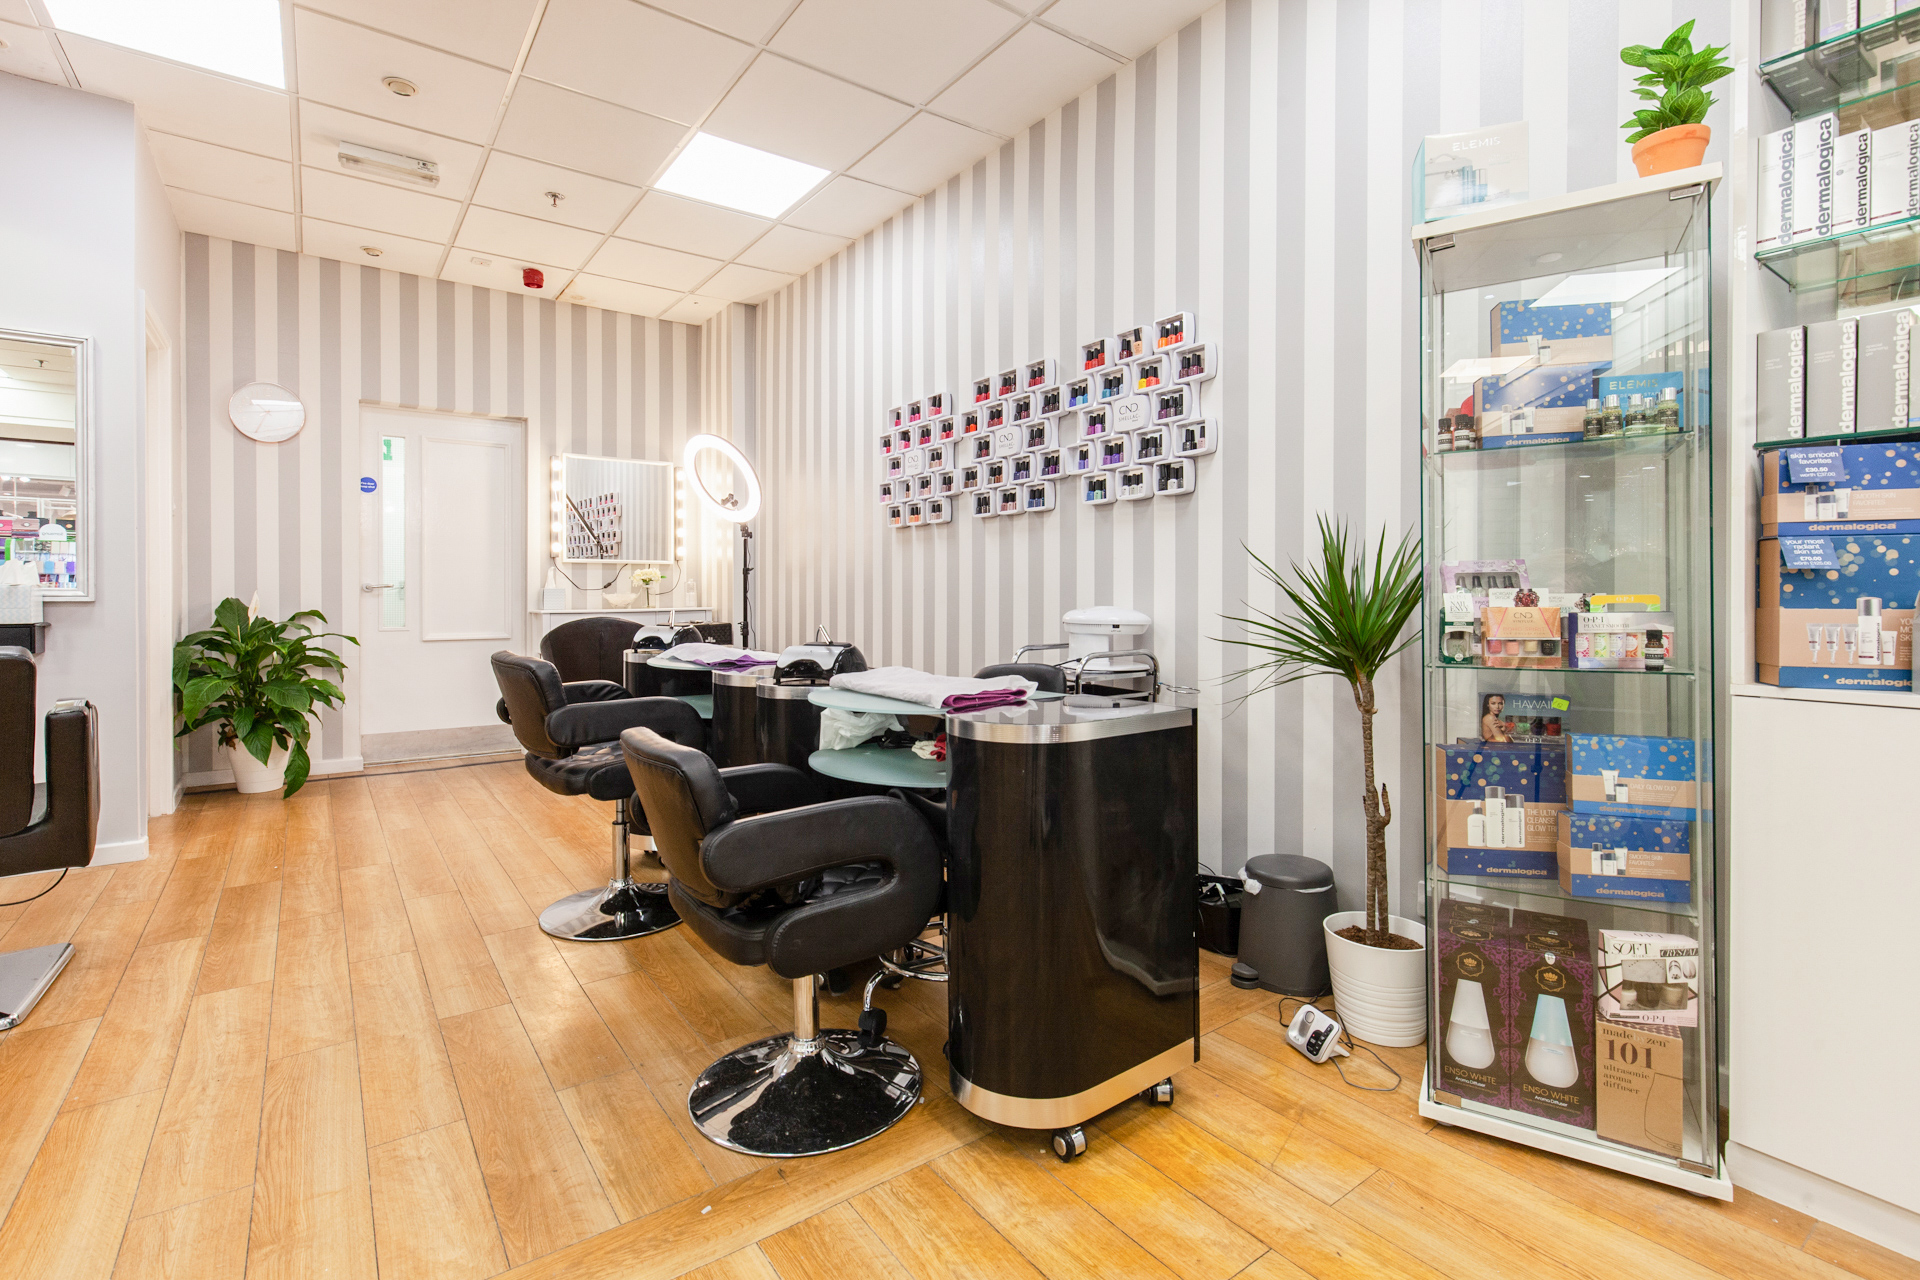 Lifeline Beauty Hair and Makeup in Redhill